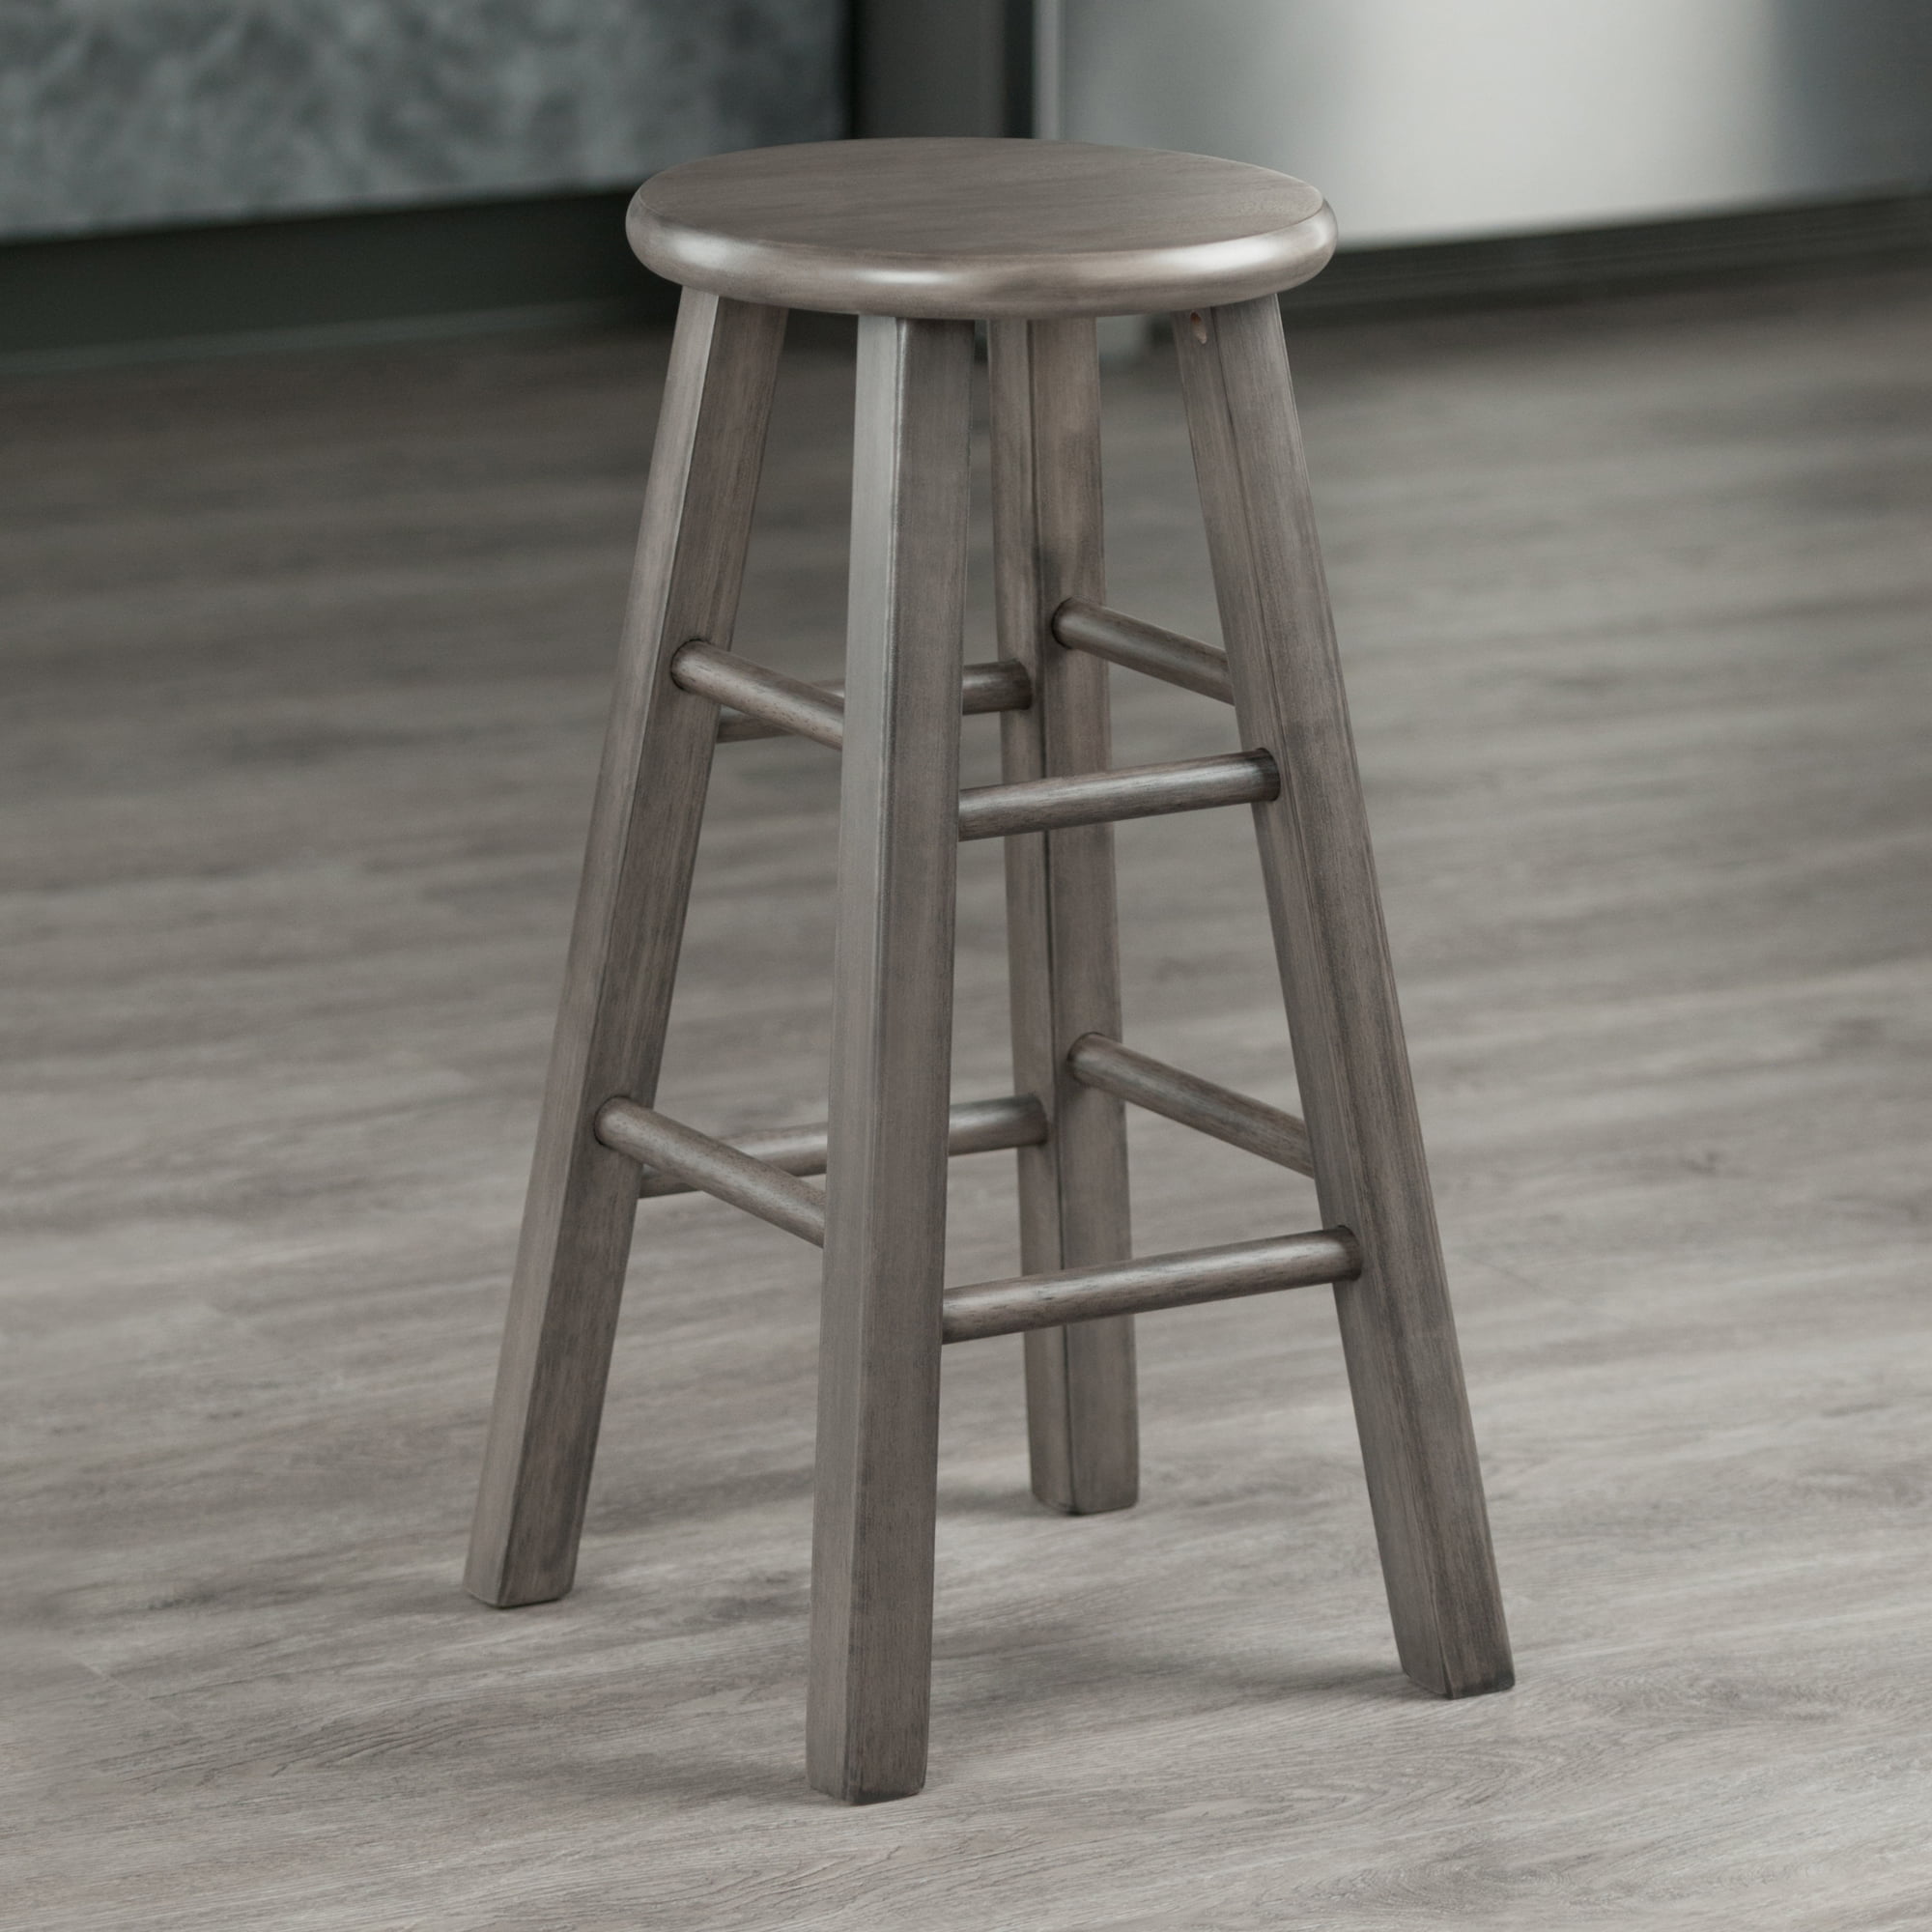 Winsome Wood Ivy 24" Counter Stool, Rustic Gray Finish - image 5 of 7